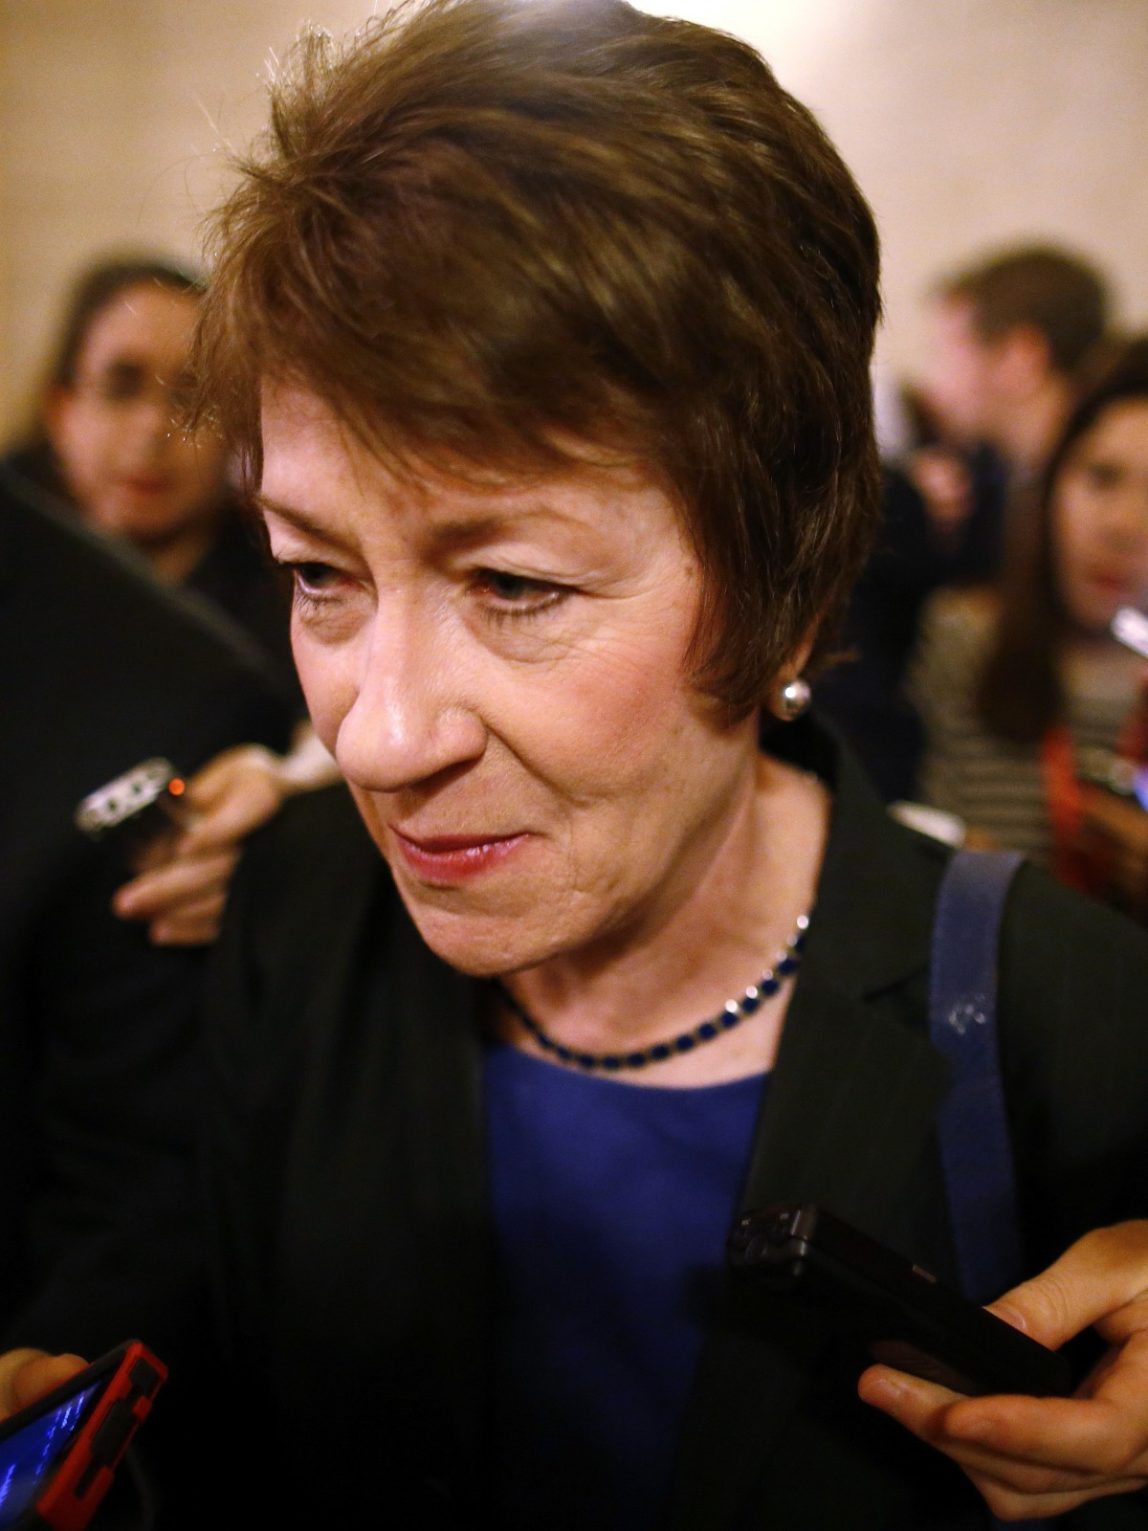 An Open Letter To Maine’s Senator Susan Collins, On Her Support Of New Iran Sanctions